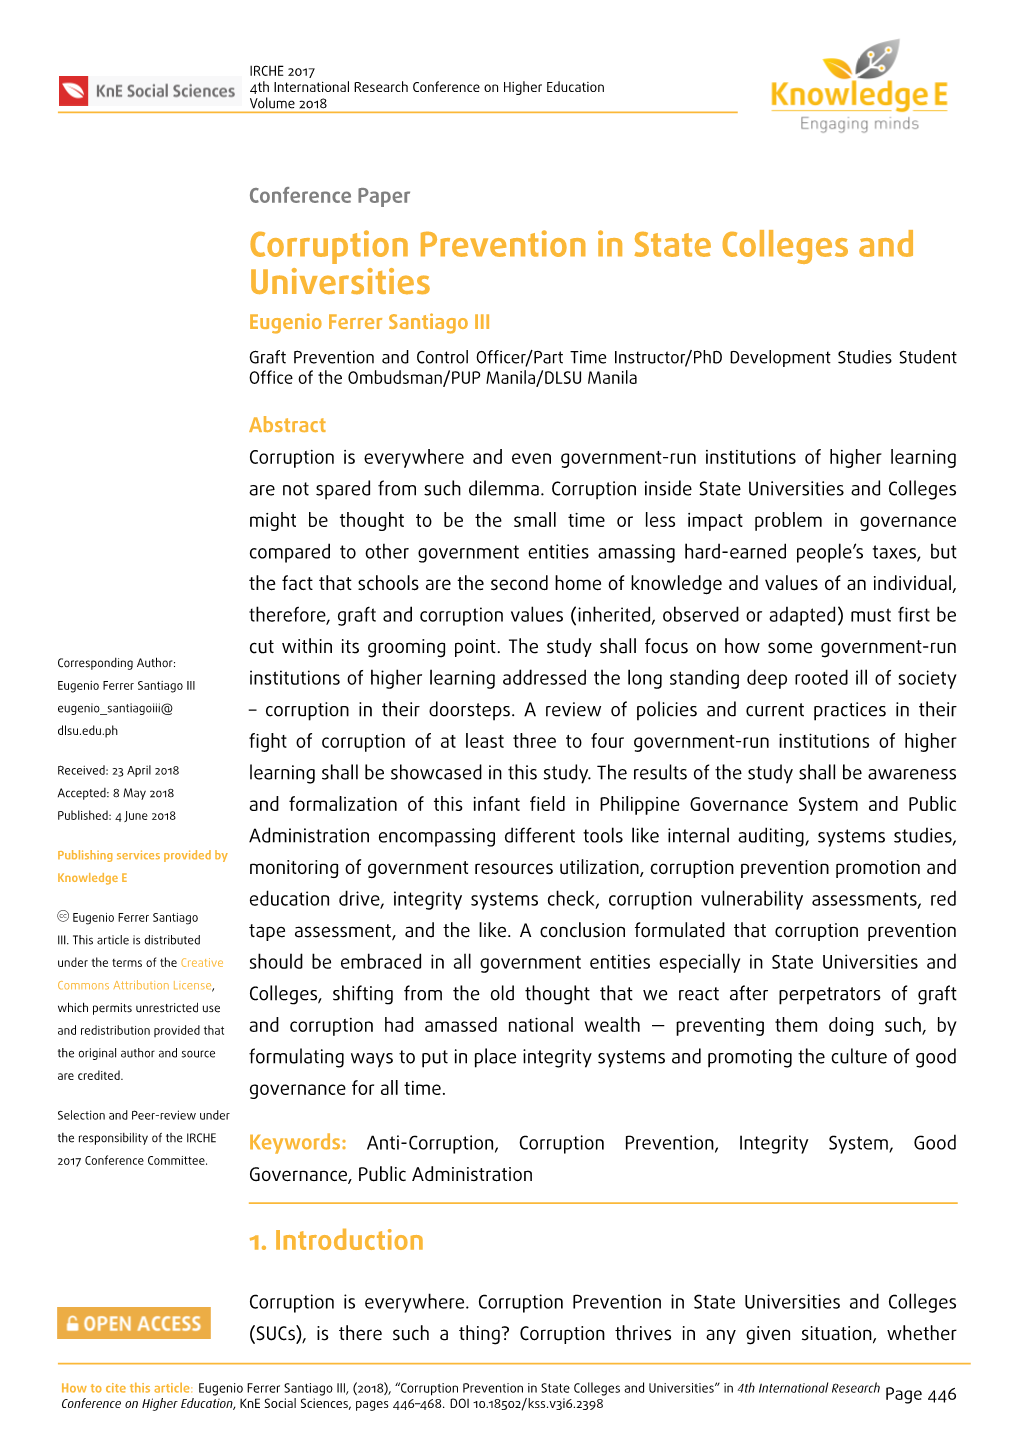 Corruption Prevention in State Colleges and Universities